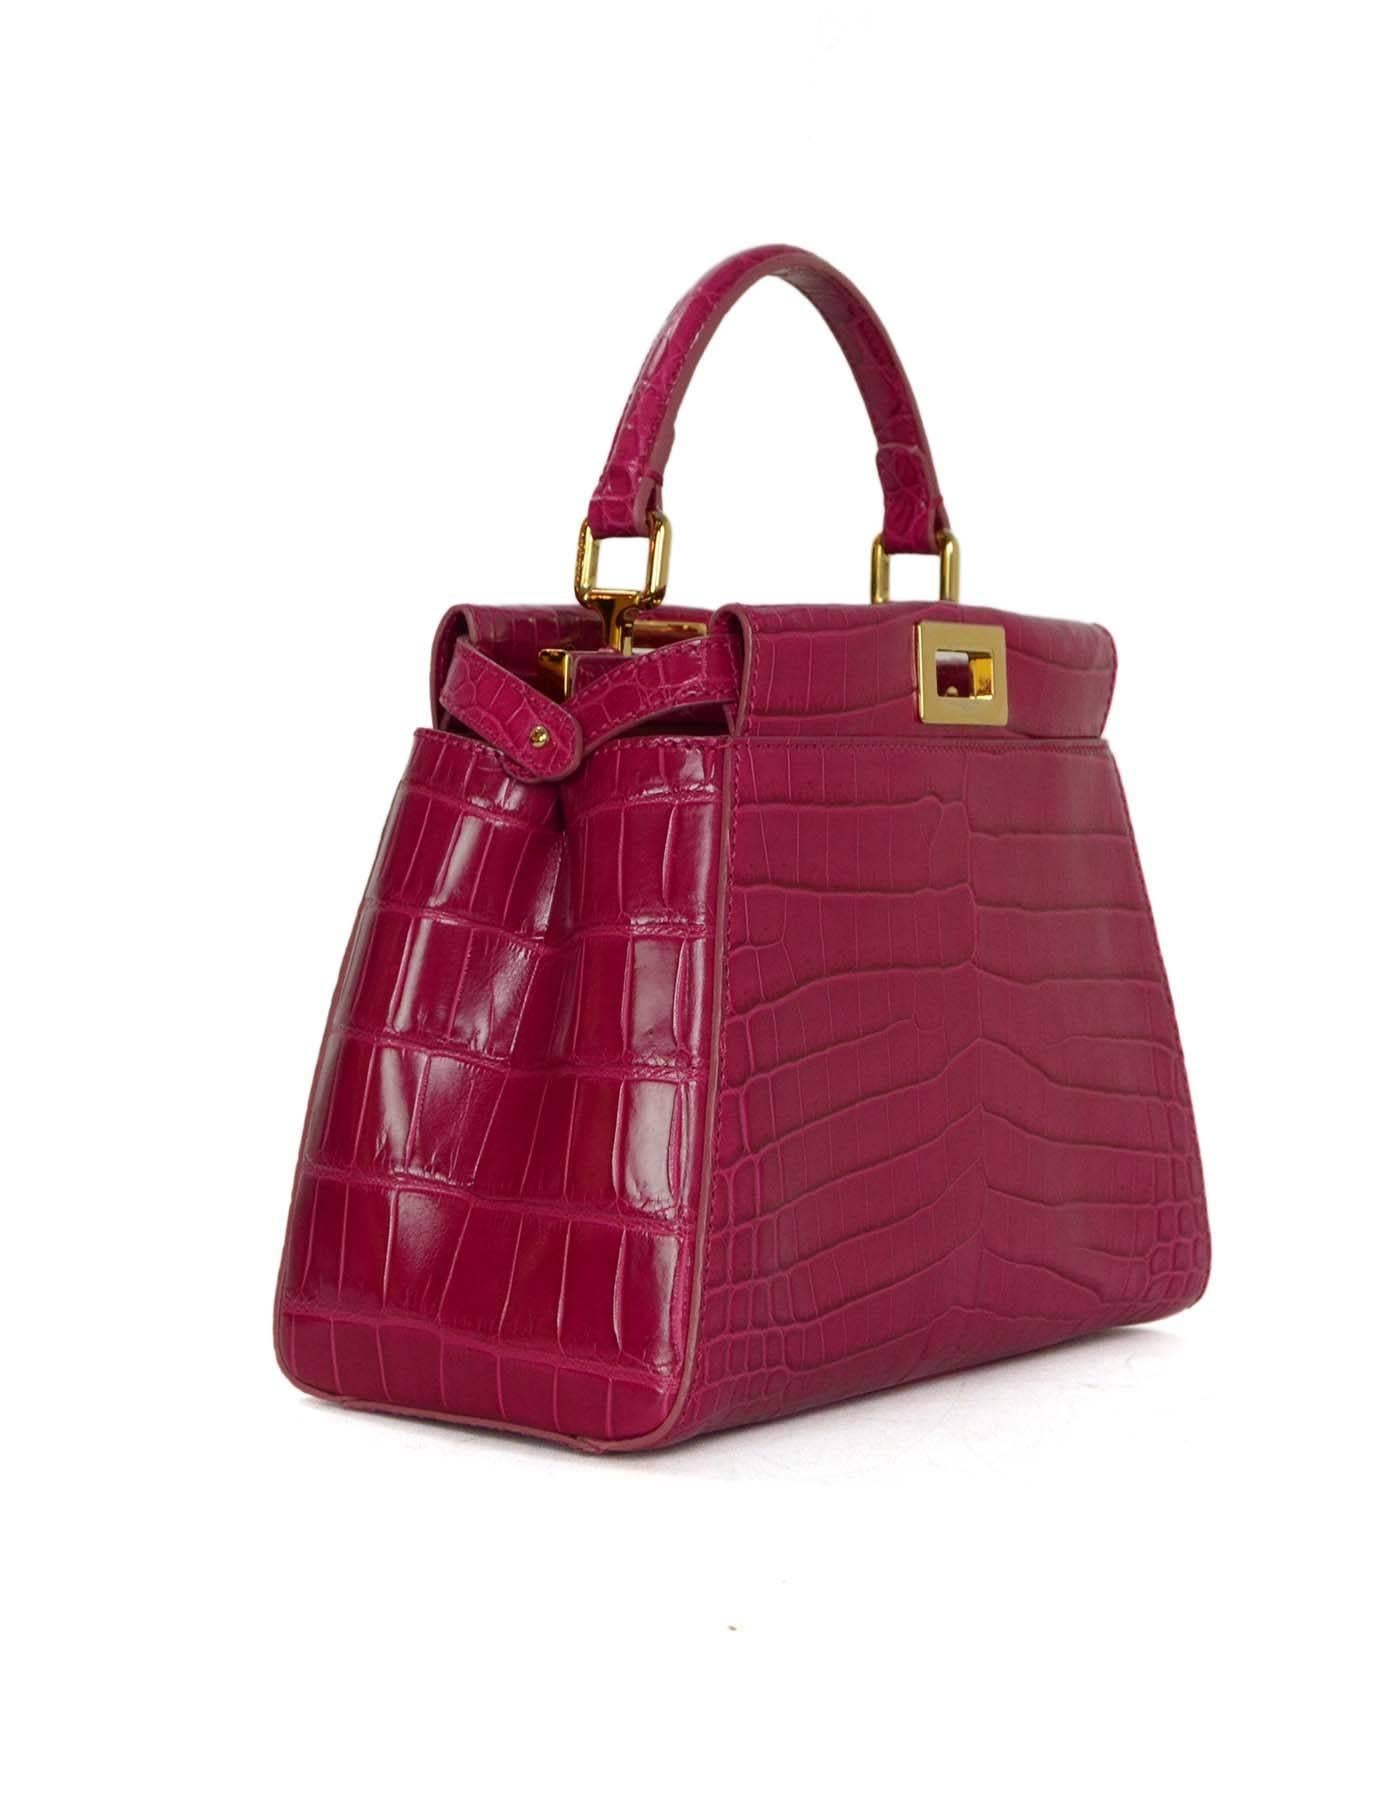 Fendi Hot Pink Glazed Crocodile Mini Peekaboo Bag
Features removable adjustable strap

-Made in: Italy
-Color: Hot pink and goldtone
-Hardware: Goldtone
-Materials: Crocodile skin, leather, and metal
-Lining: Hot pink